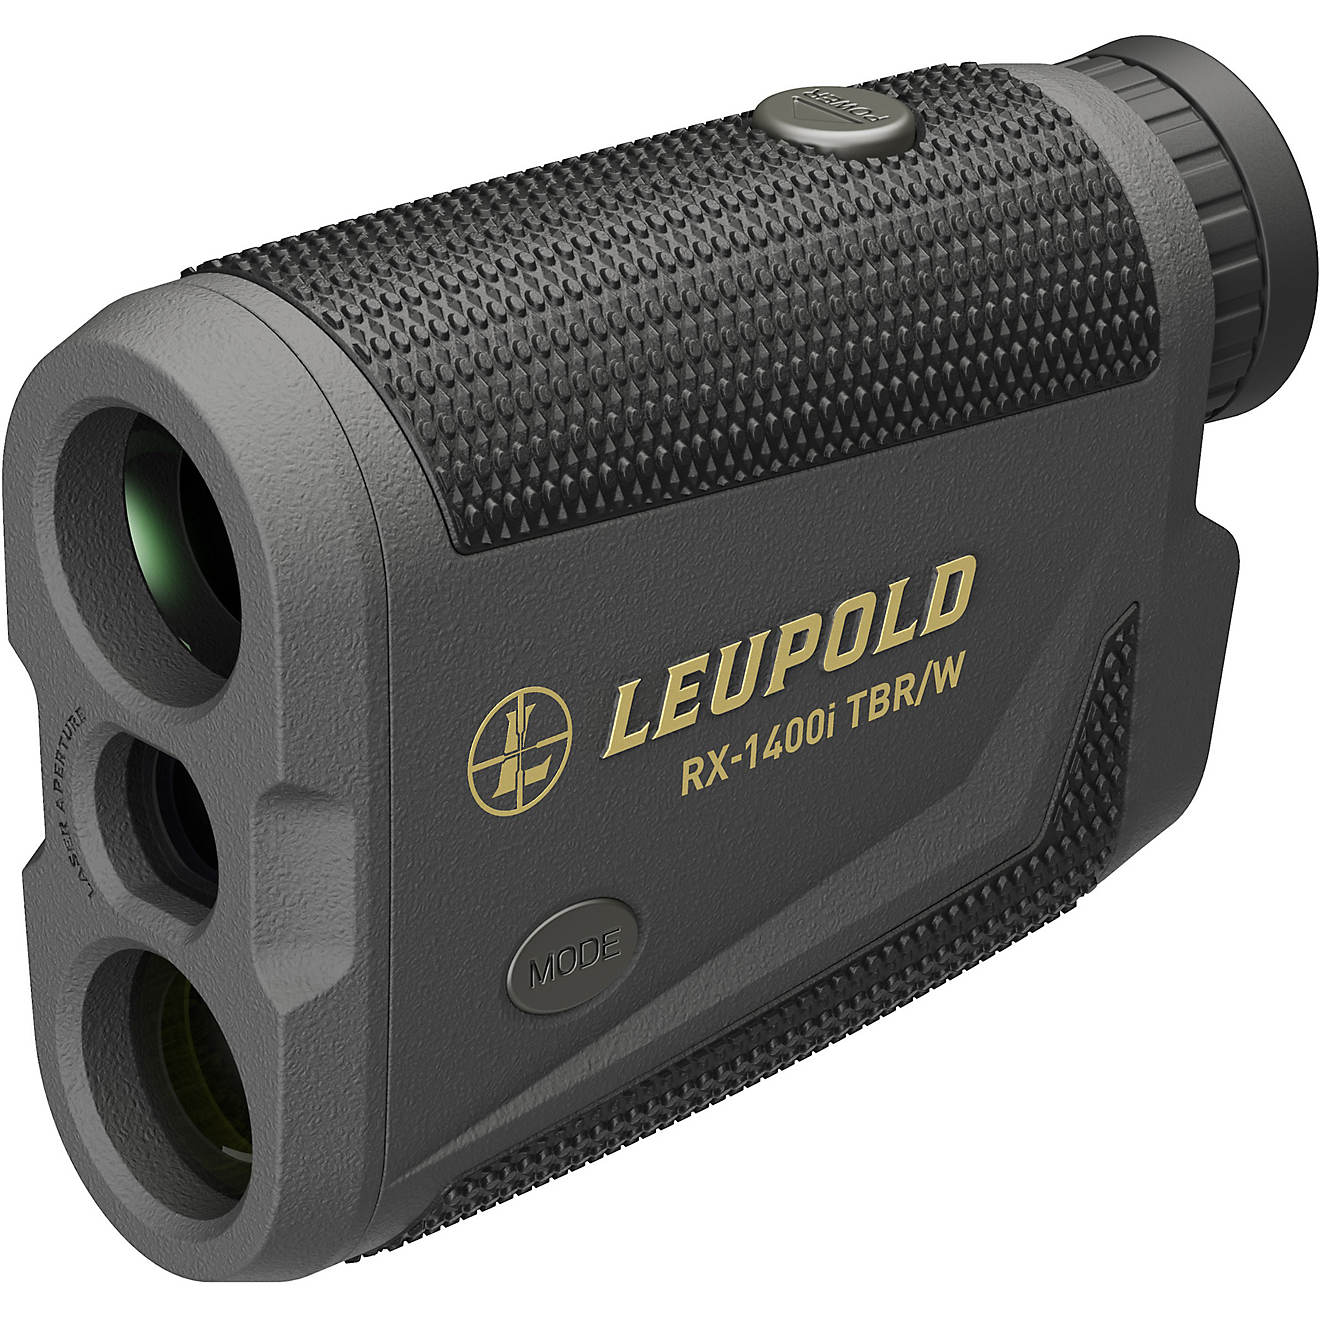 Leupold RX-1400i TBR/W Laser 21 mm Rangefinder with DNA Red Reticle                                                              - view number 1